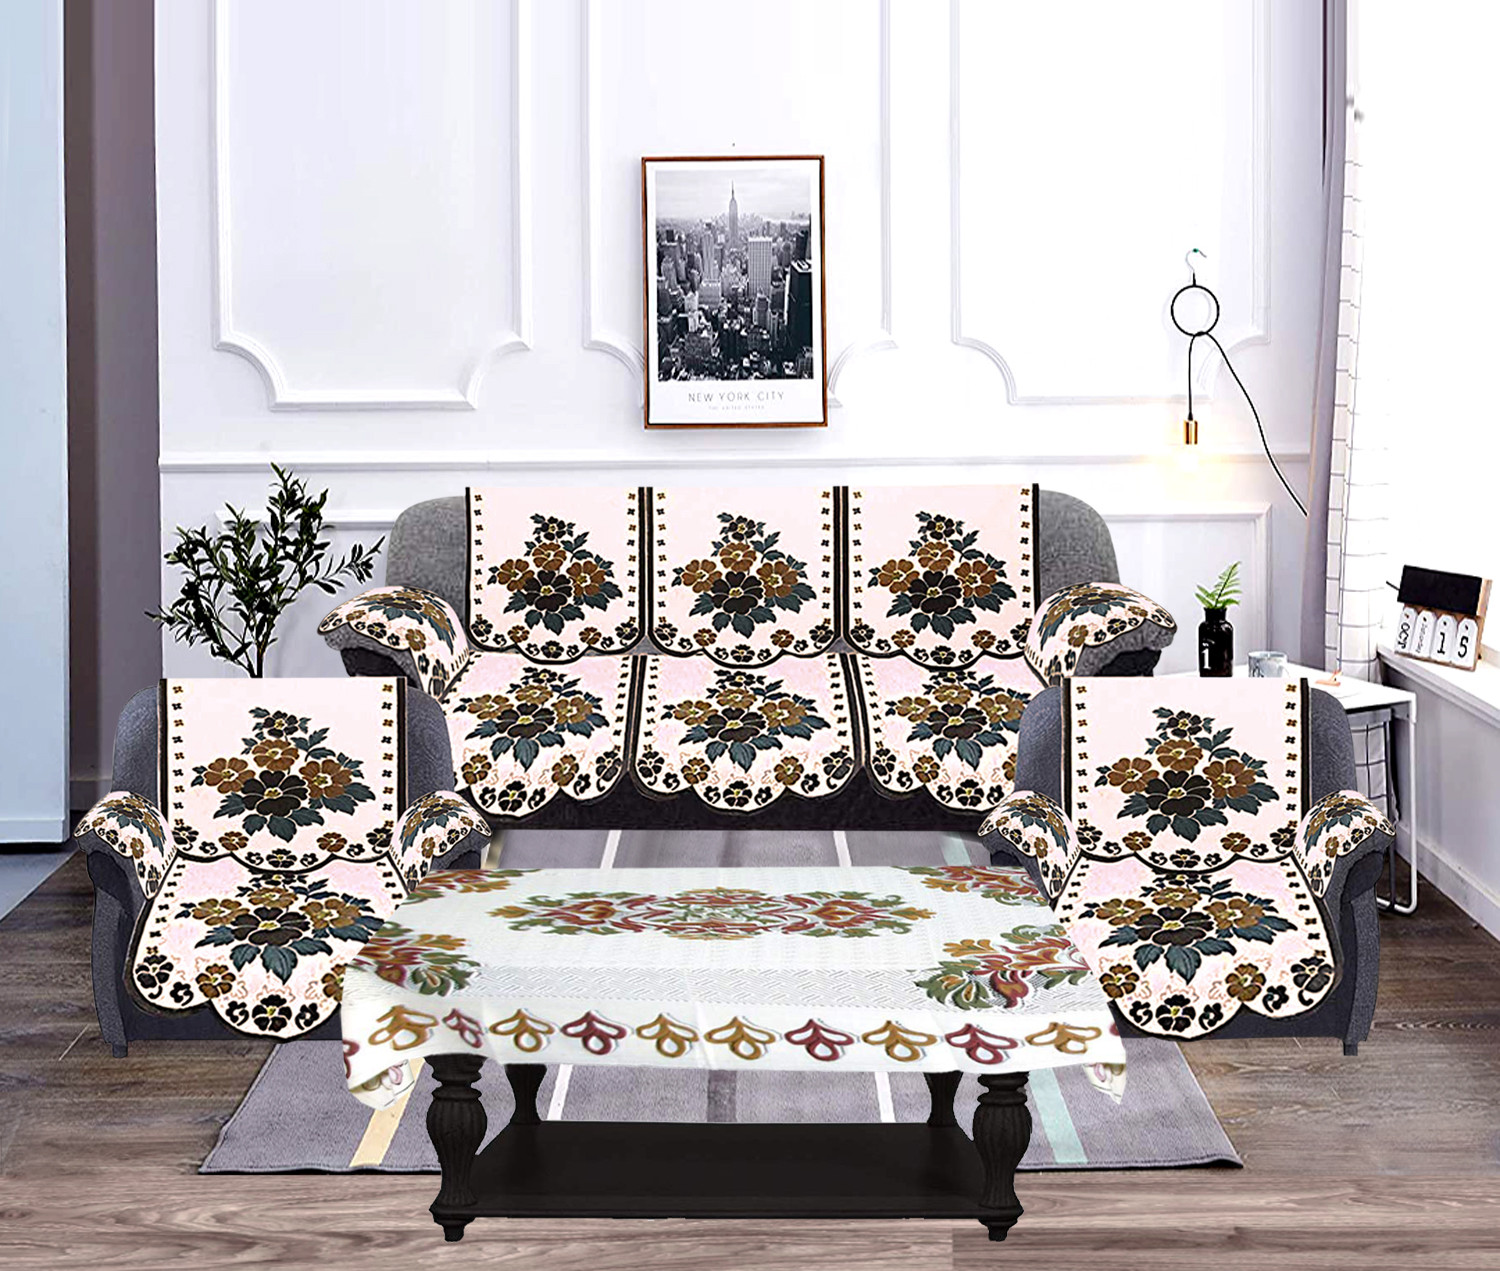 Kuber Industries Flower Design Cotton 5 Seater Sofa Cover With 6 Pieces Arms cover And 1 Center Table Cover Use Both Side, Living Room, Drawing Room, Bedroom, Guest Room (Set Of17, Cream & Brown)-KUBMRT12035